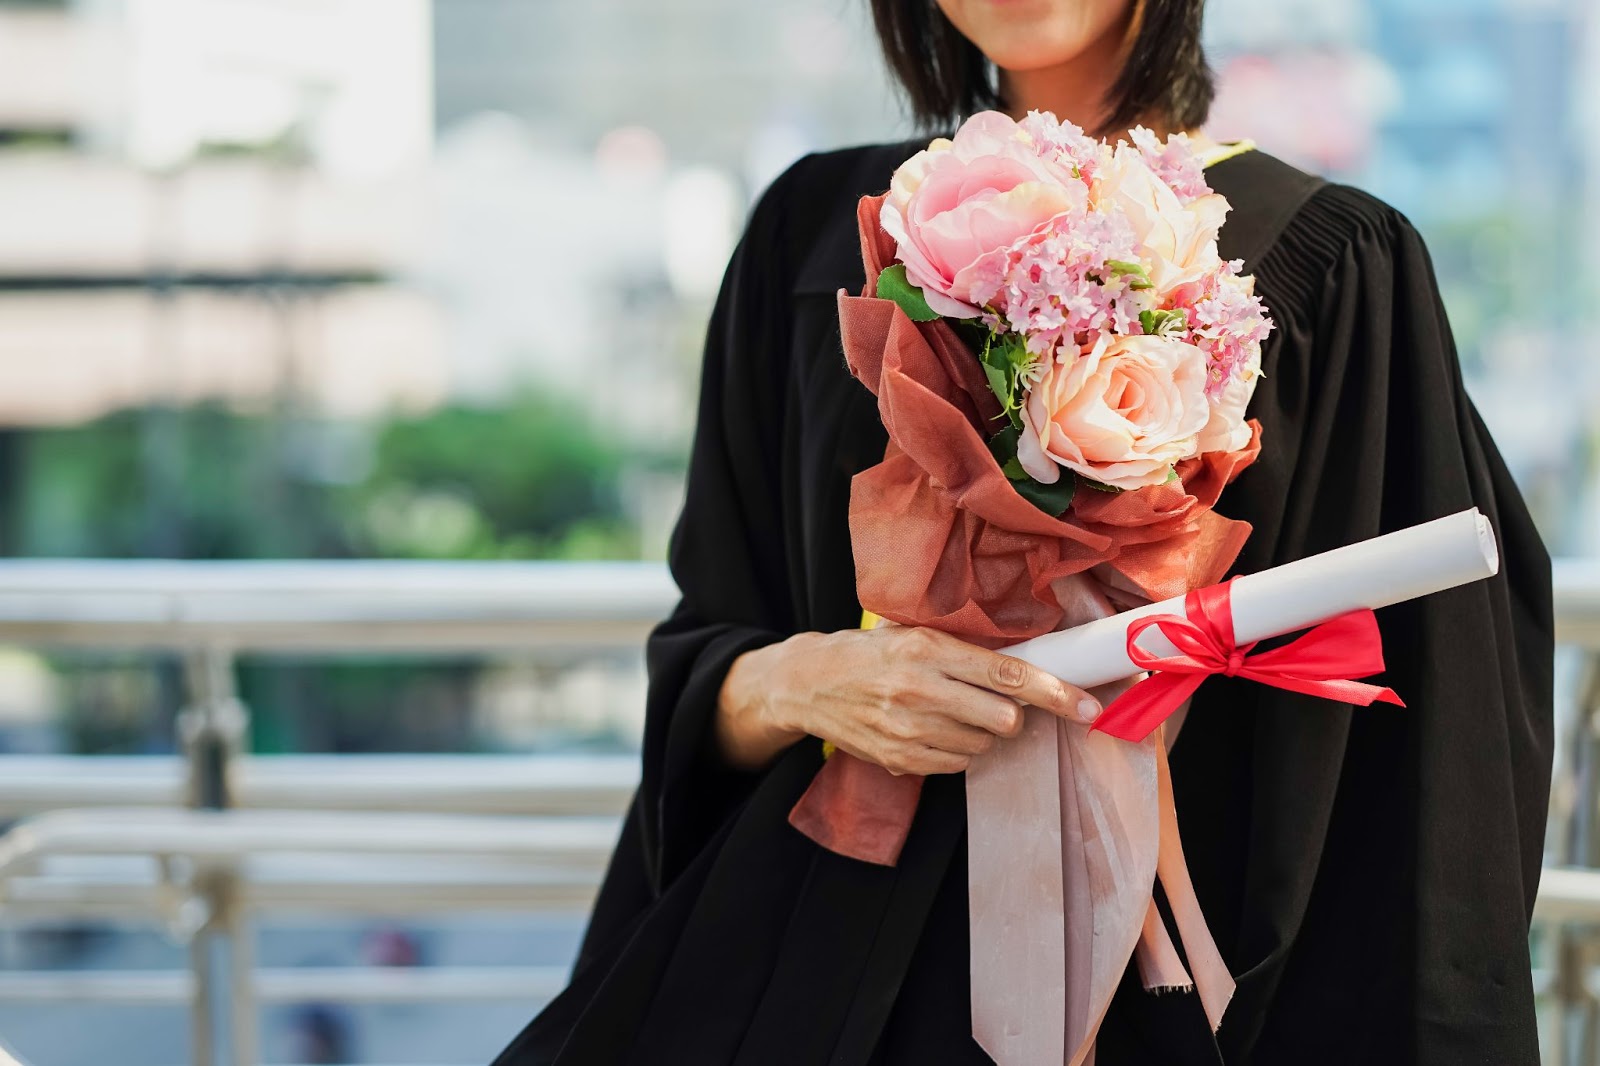 What are the Best Flowers to Give for Graduation?